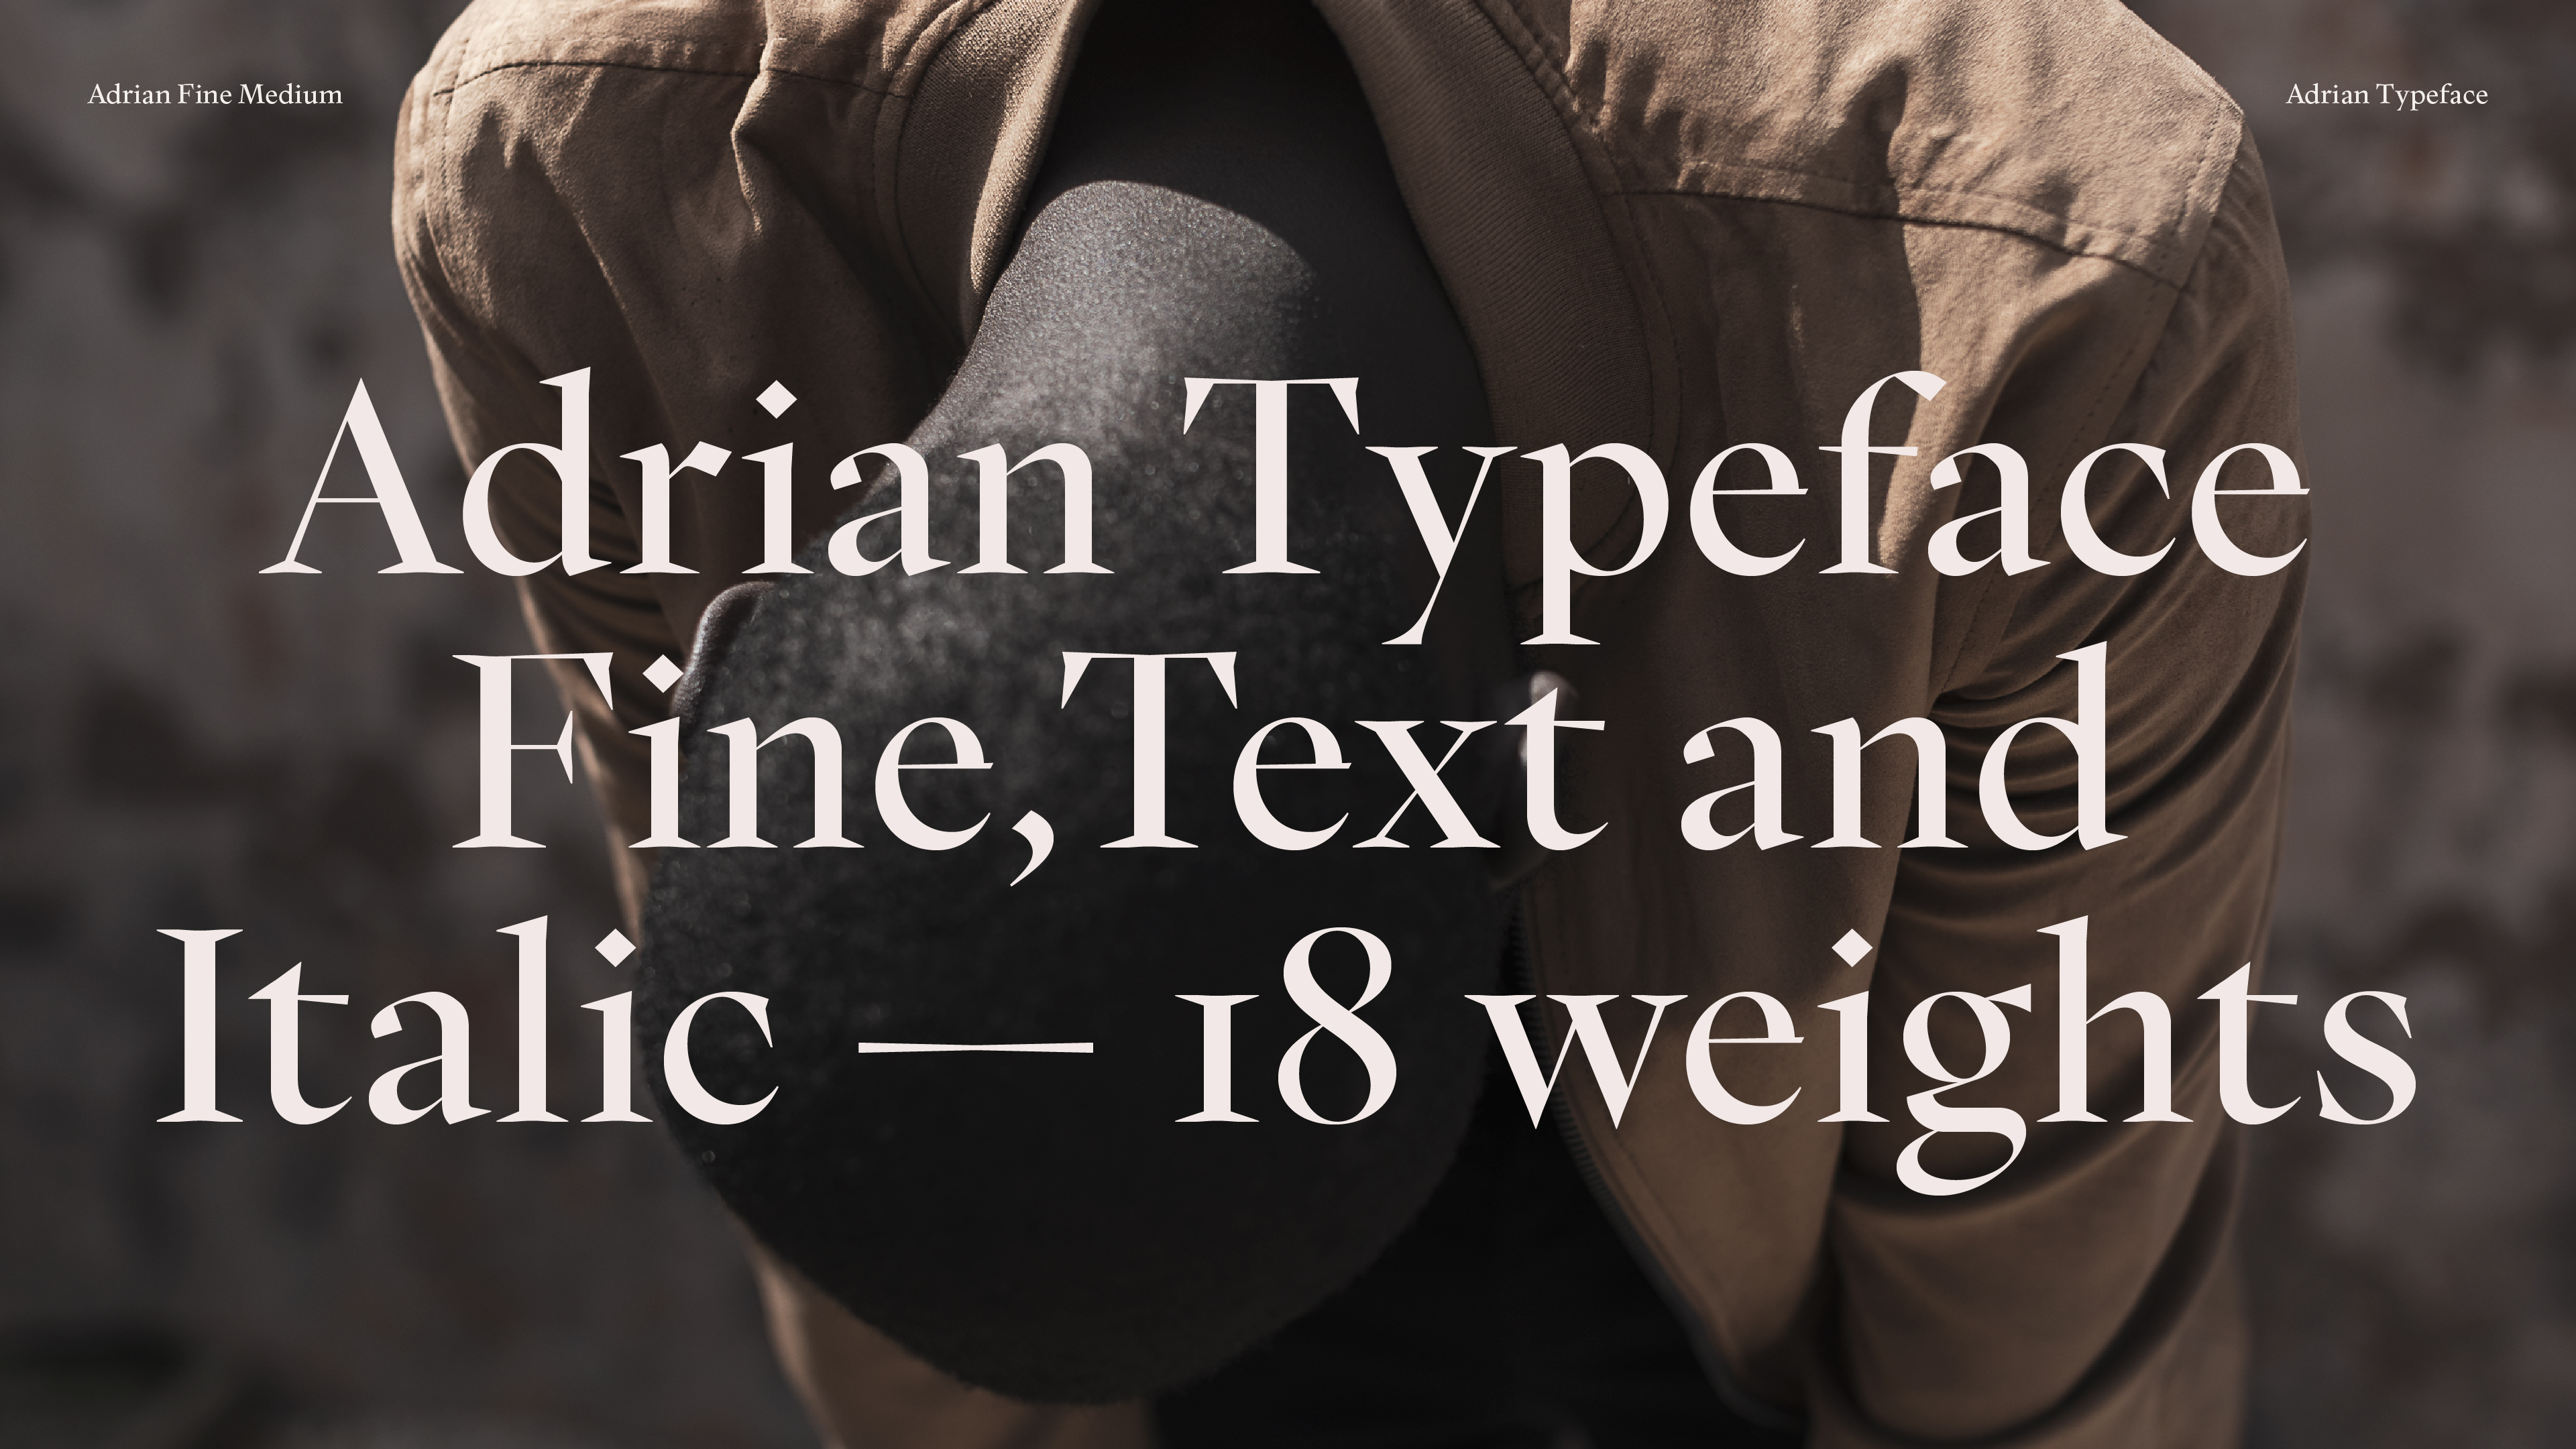 Cover image: The Adrian Brinkerhoff Poetry Foundation, Typeface